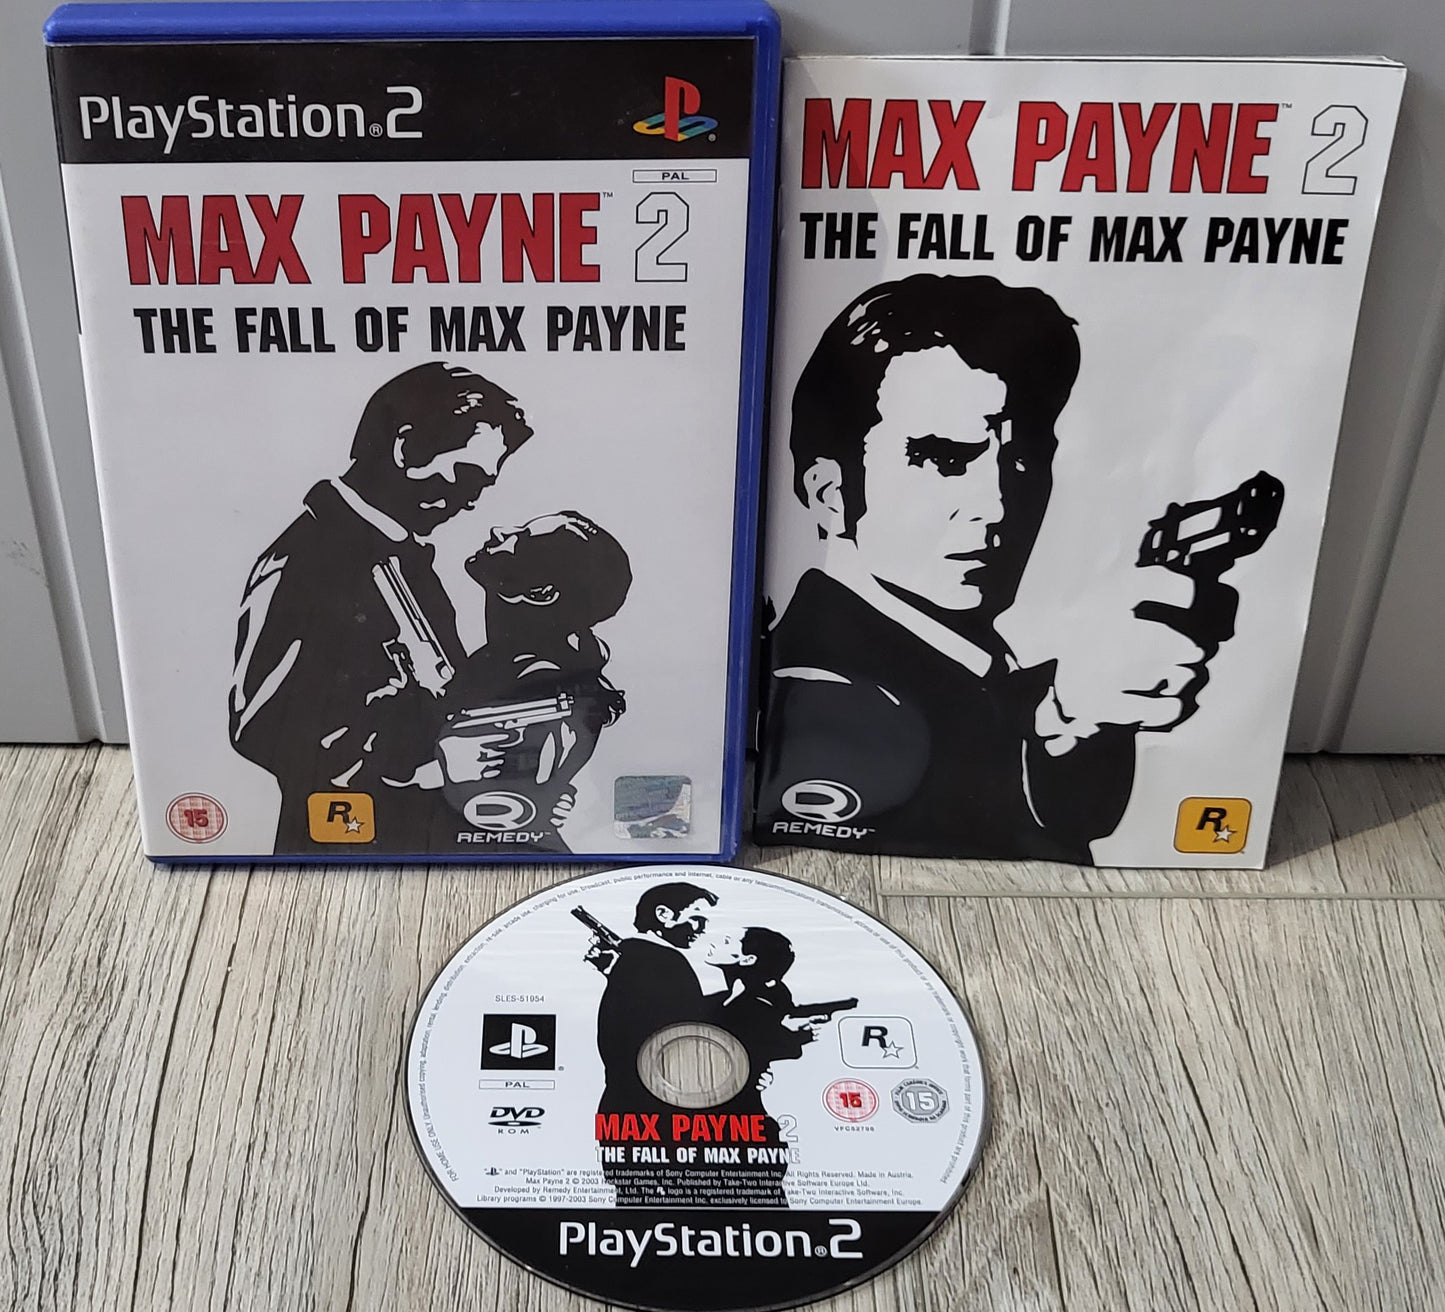 Max Payne 2 the Fall of Max Payne Sony Playstation 2 (PS2) Game